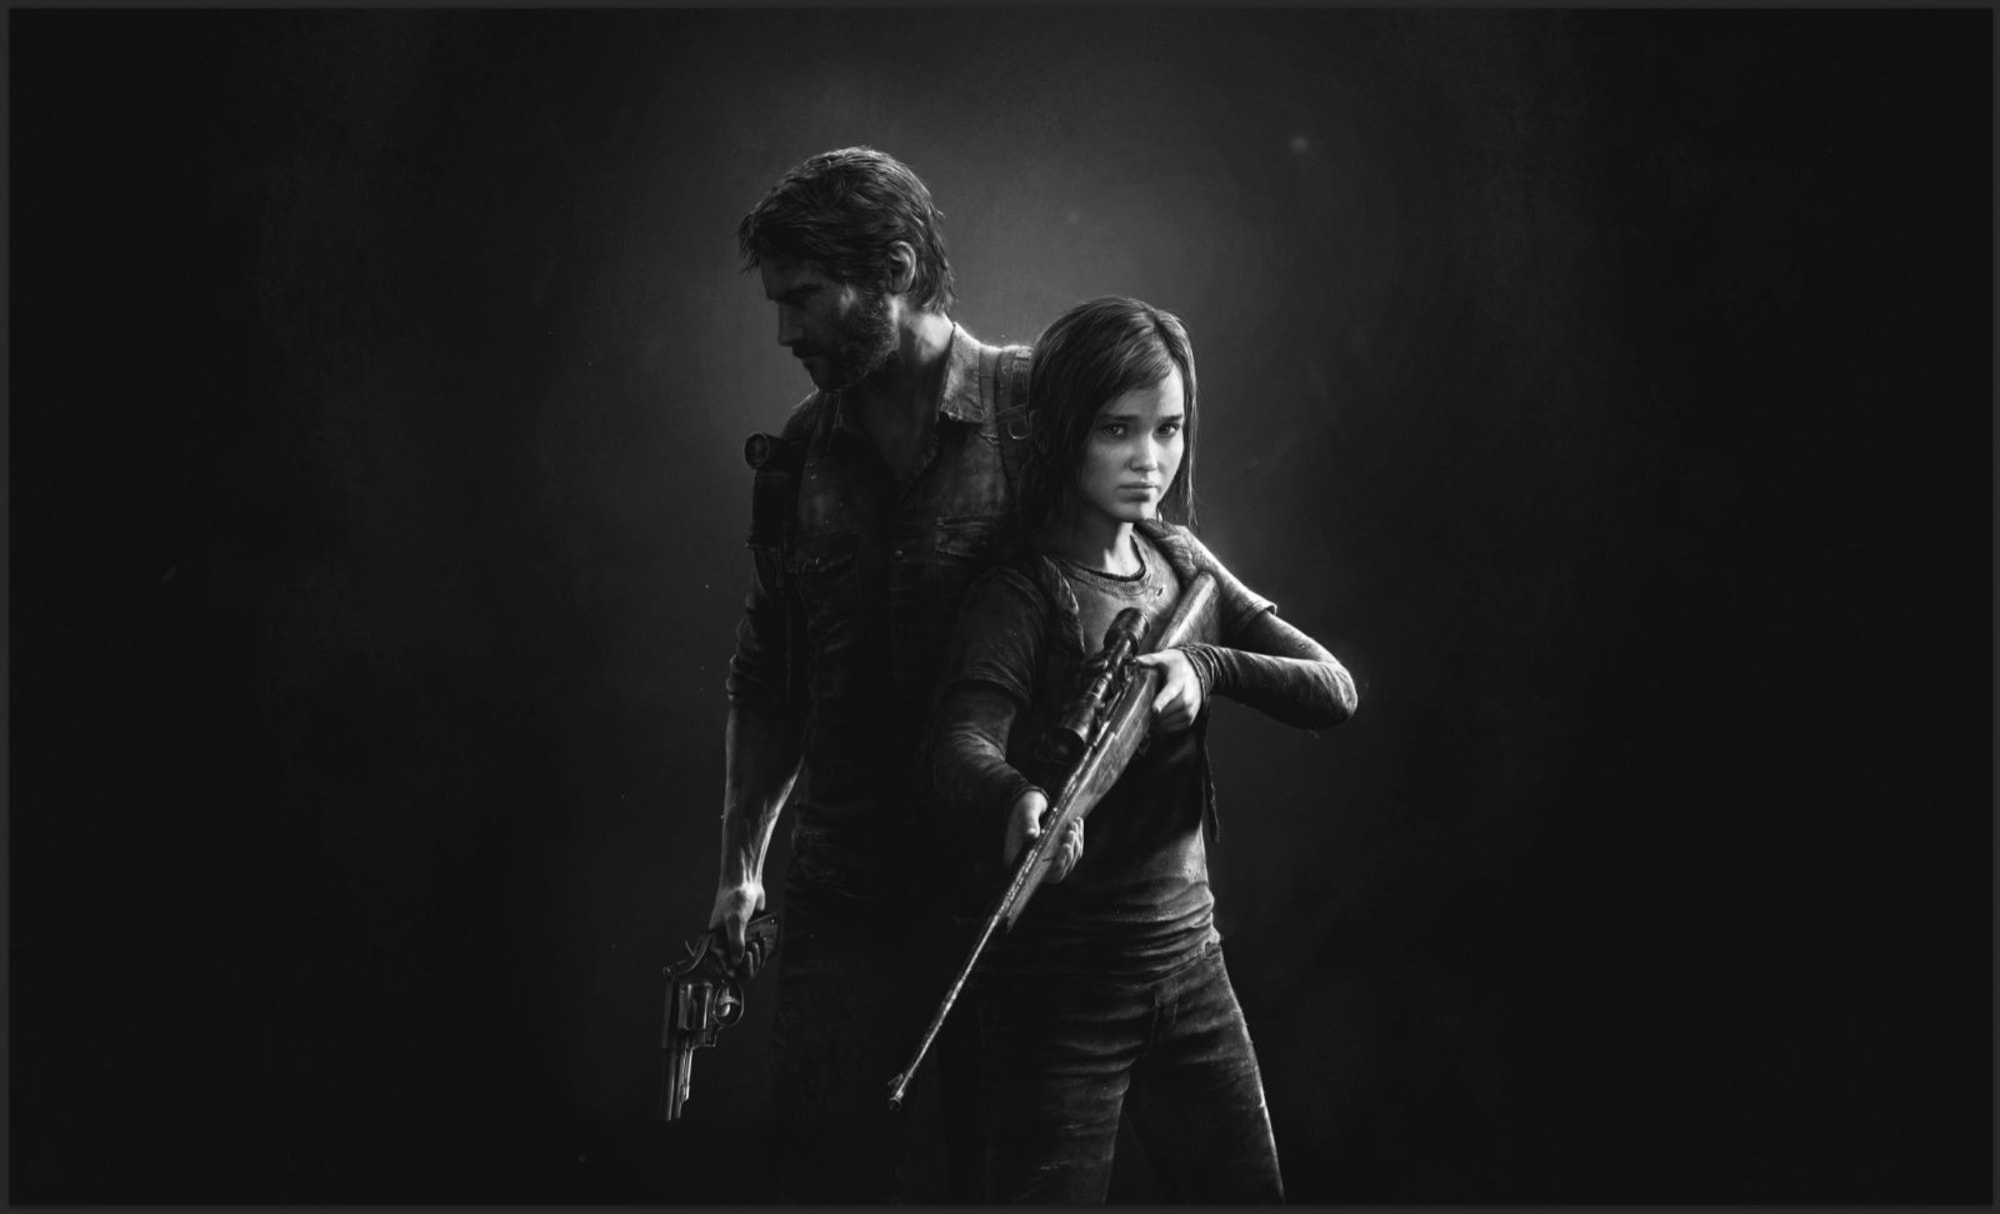 The Last of Us Season 1 Ending Explained: How Finale Differs from the Game